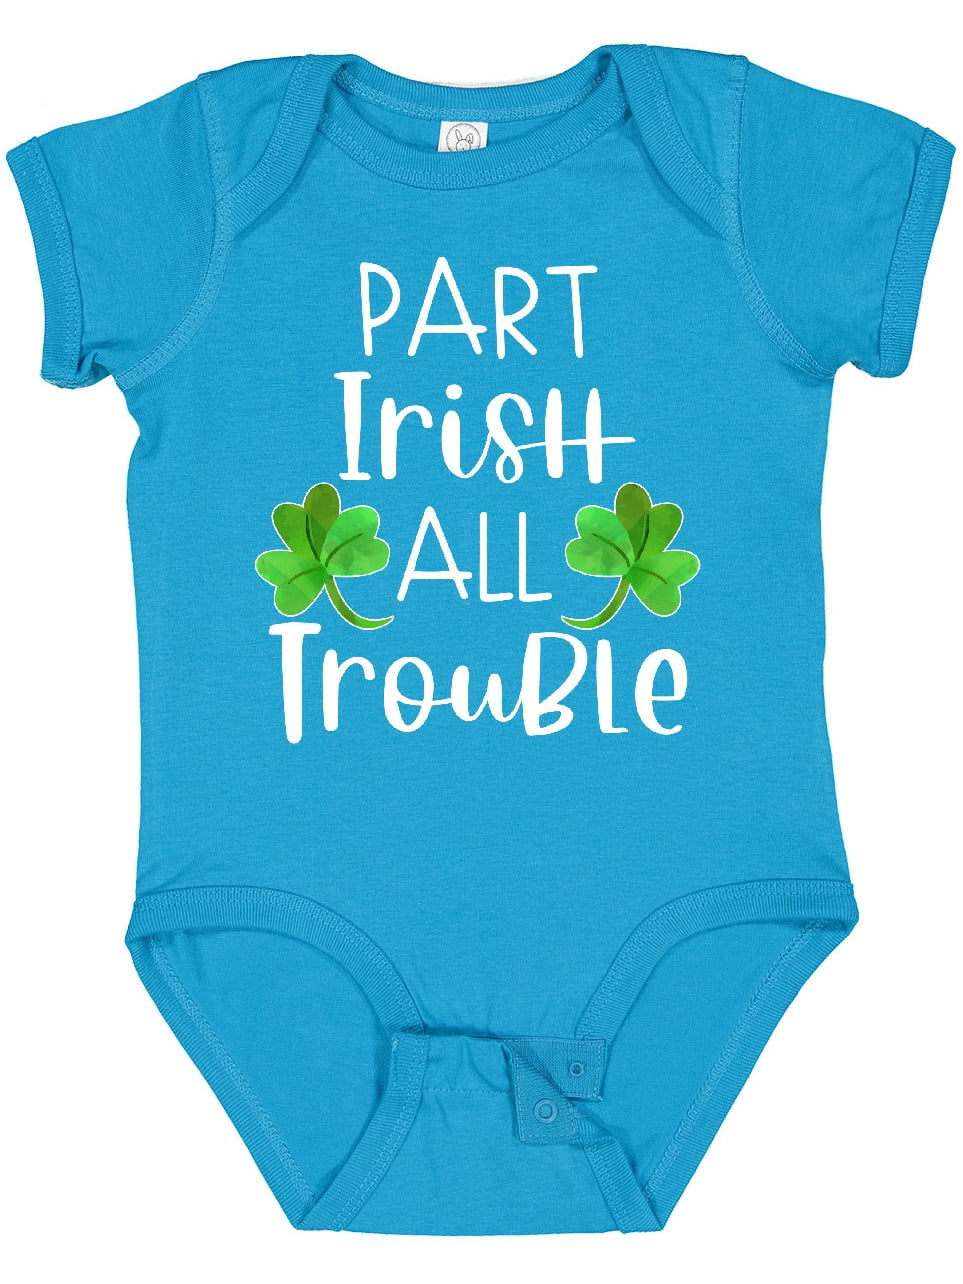 Part Irish All Trouble Infant Bodysuit Cute St Patrick's Day Gift 